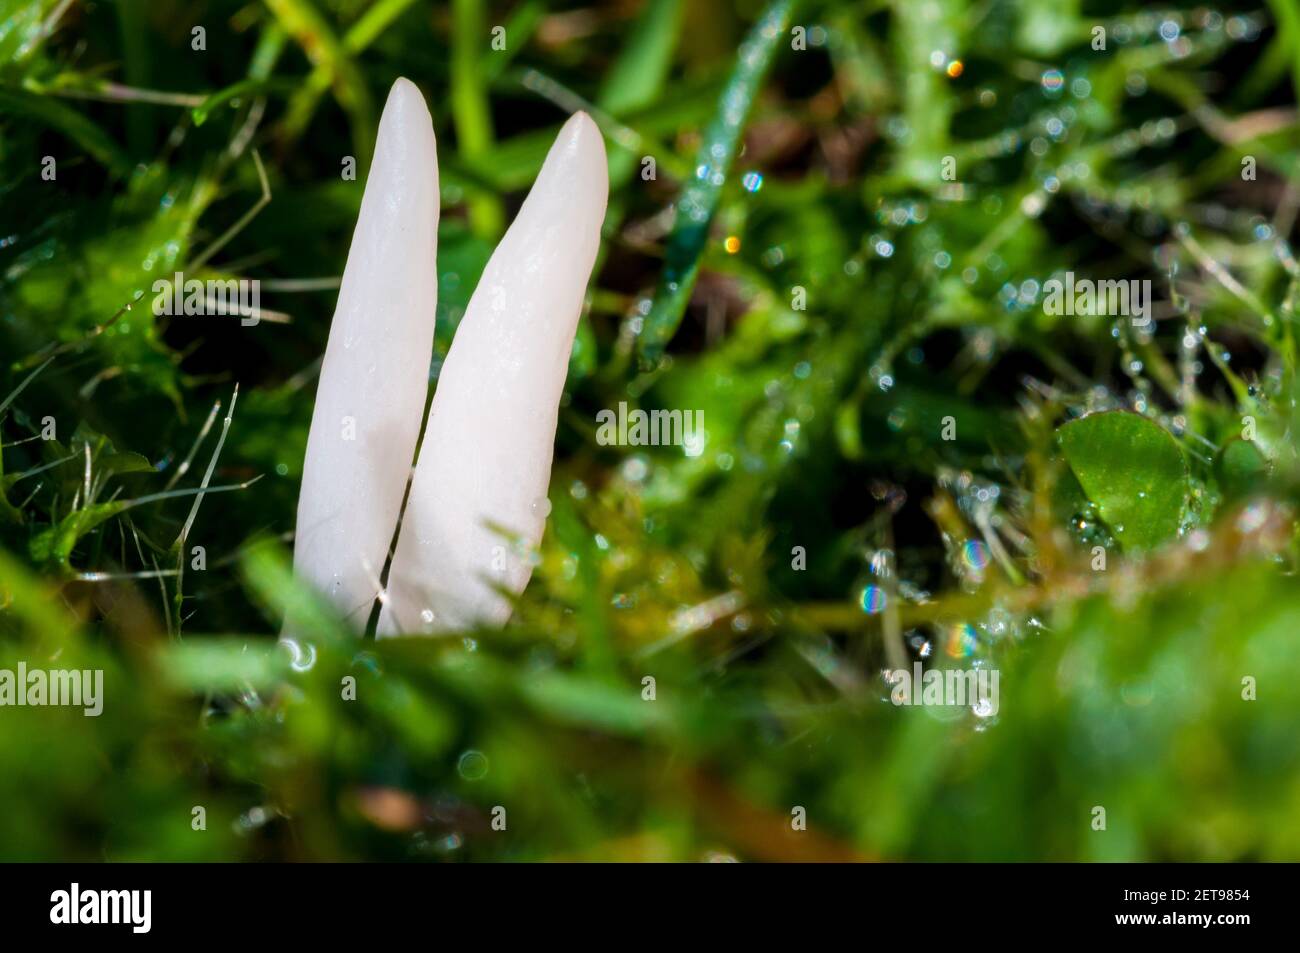 Fruiting bodies of white spindles (Clavaria fragilis) growing in grassland at the Longshaw Estate in the Peak District National Park, Derbyshire. Octo Stock Photo